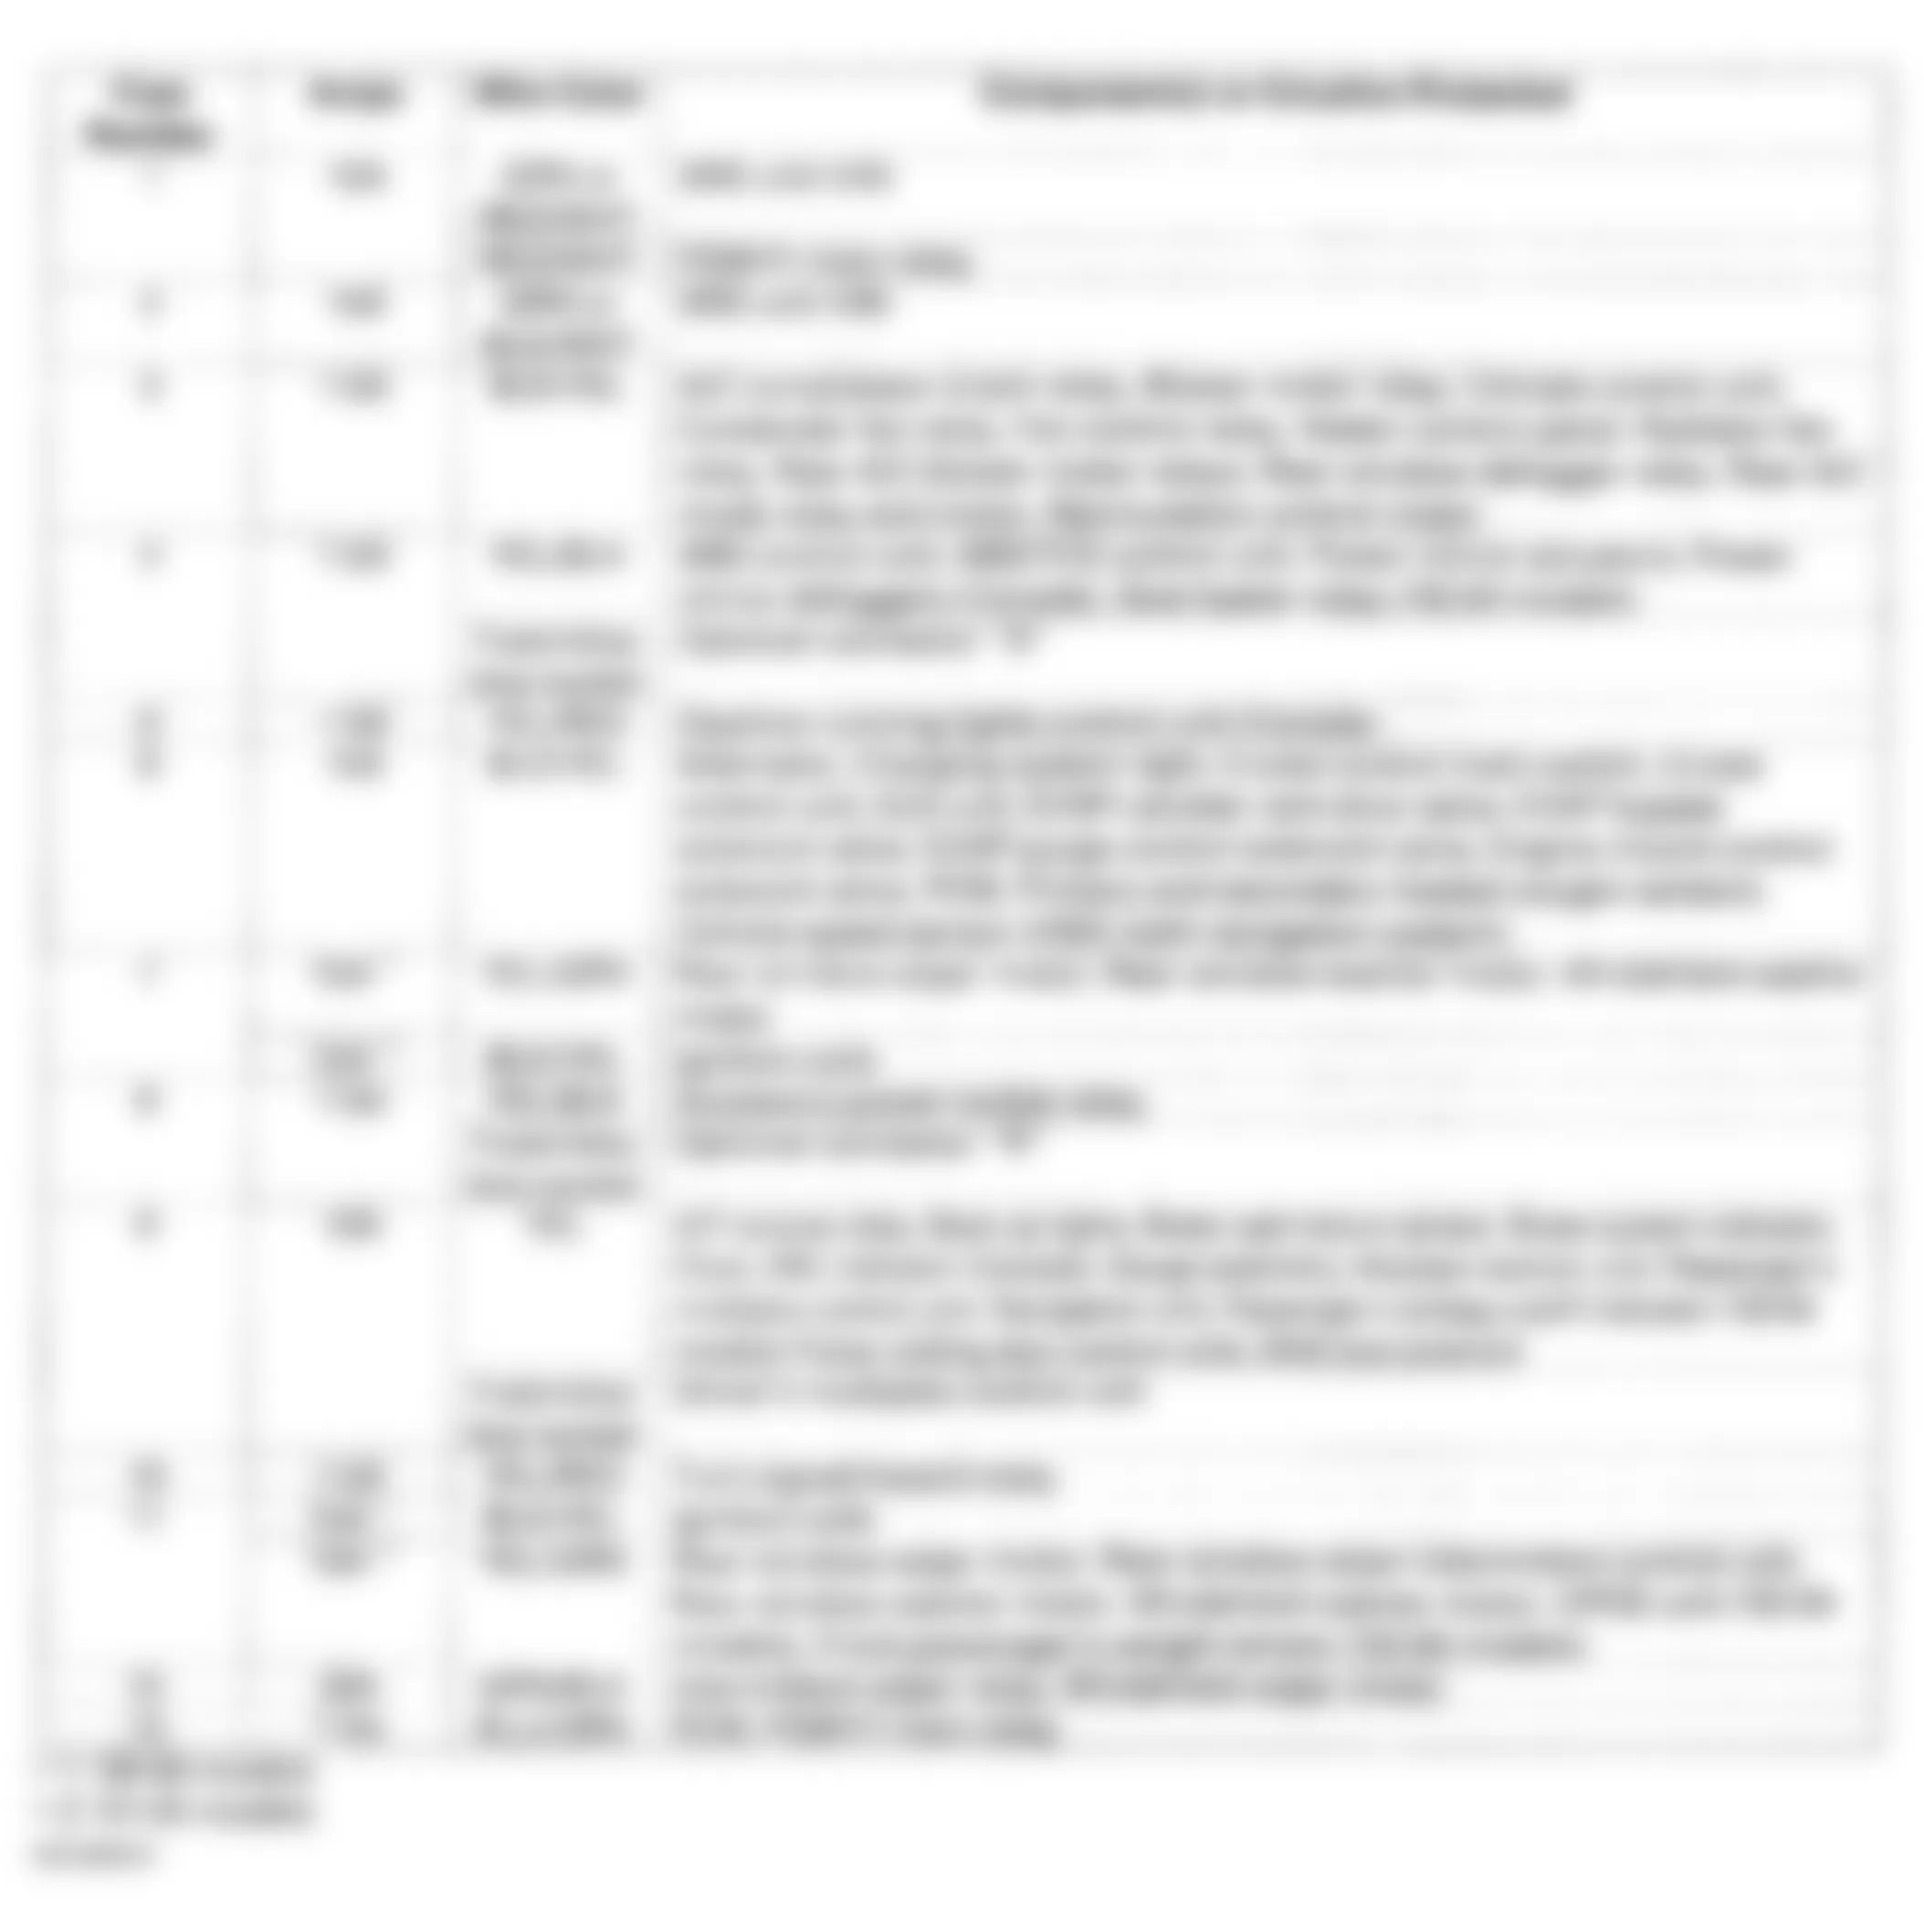 Honda Odyssey EX 2000 - Component Locations -  Drivers Under-Dash Fuse/Relay Box Identification Chart